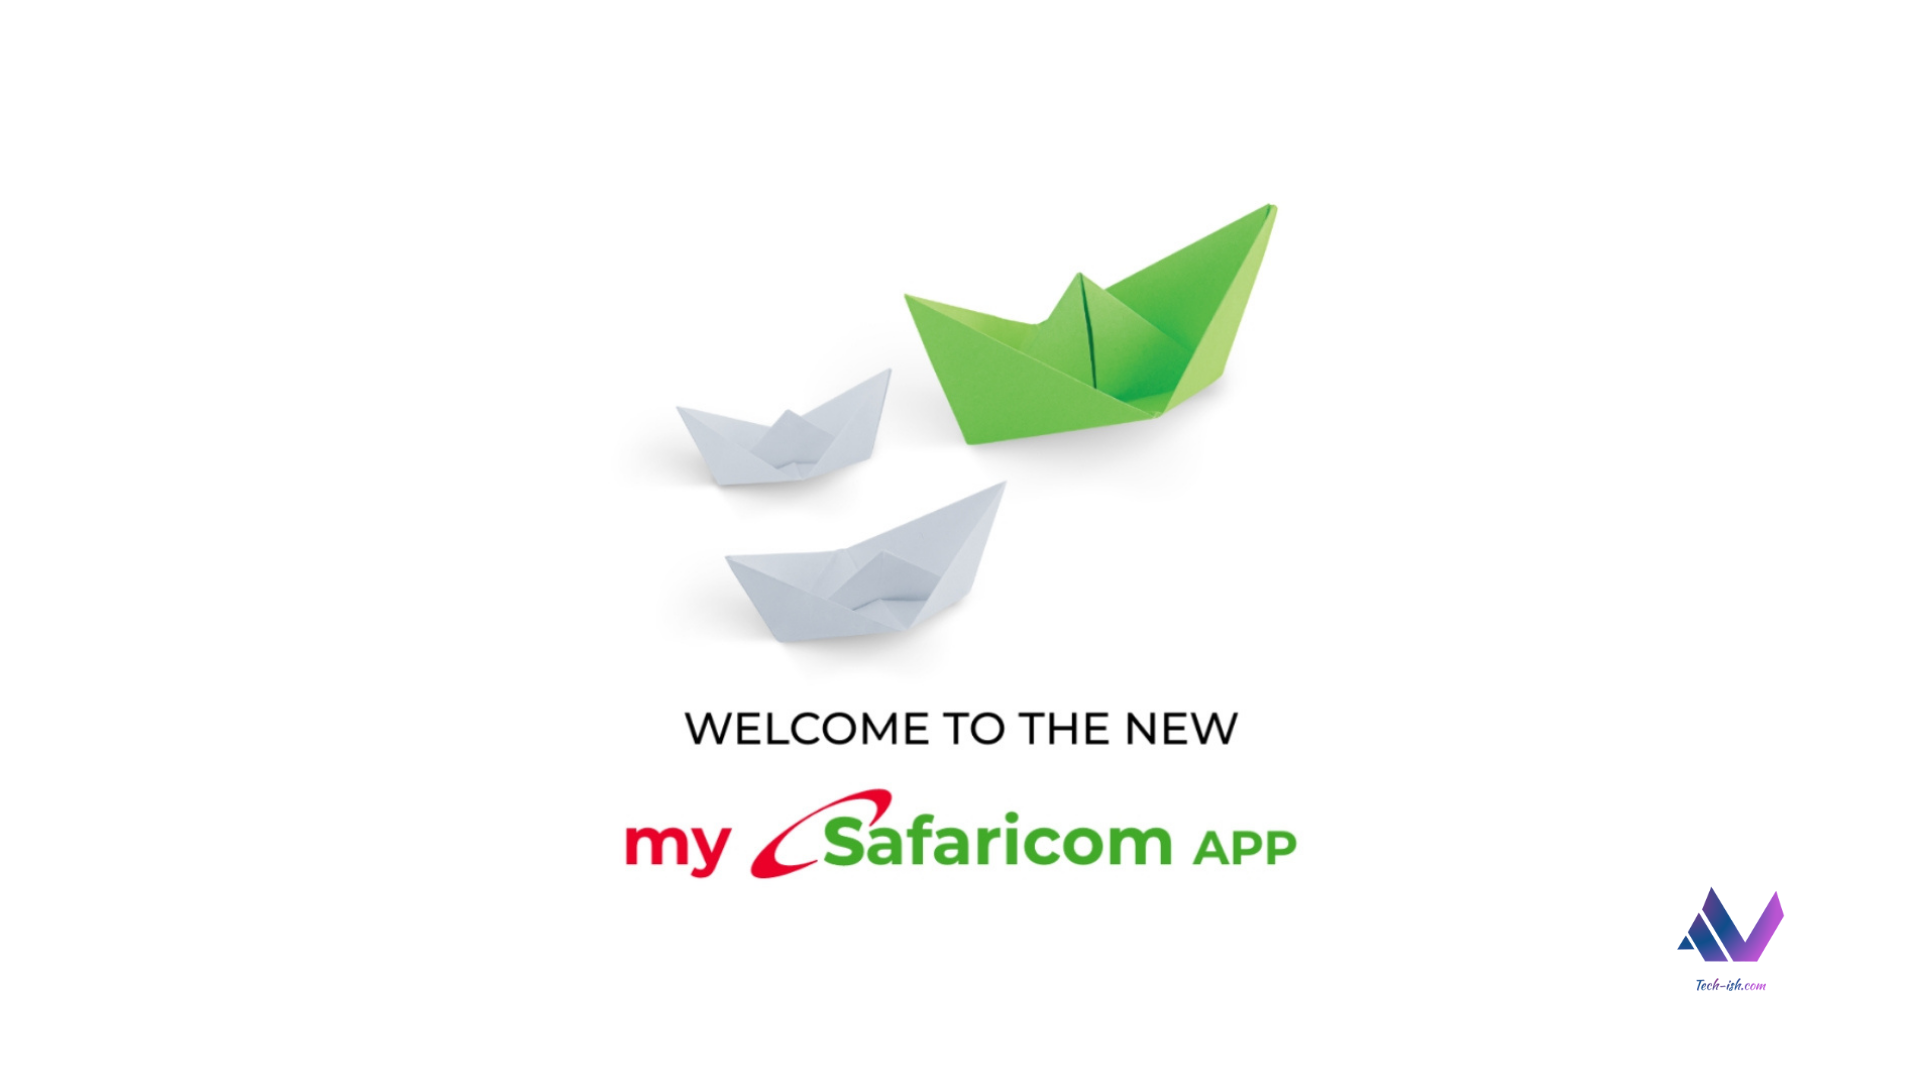 Everything good with the revamped mySafaricom App